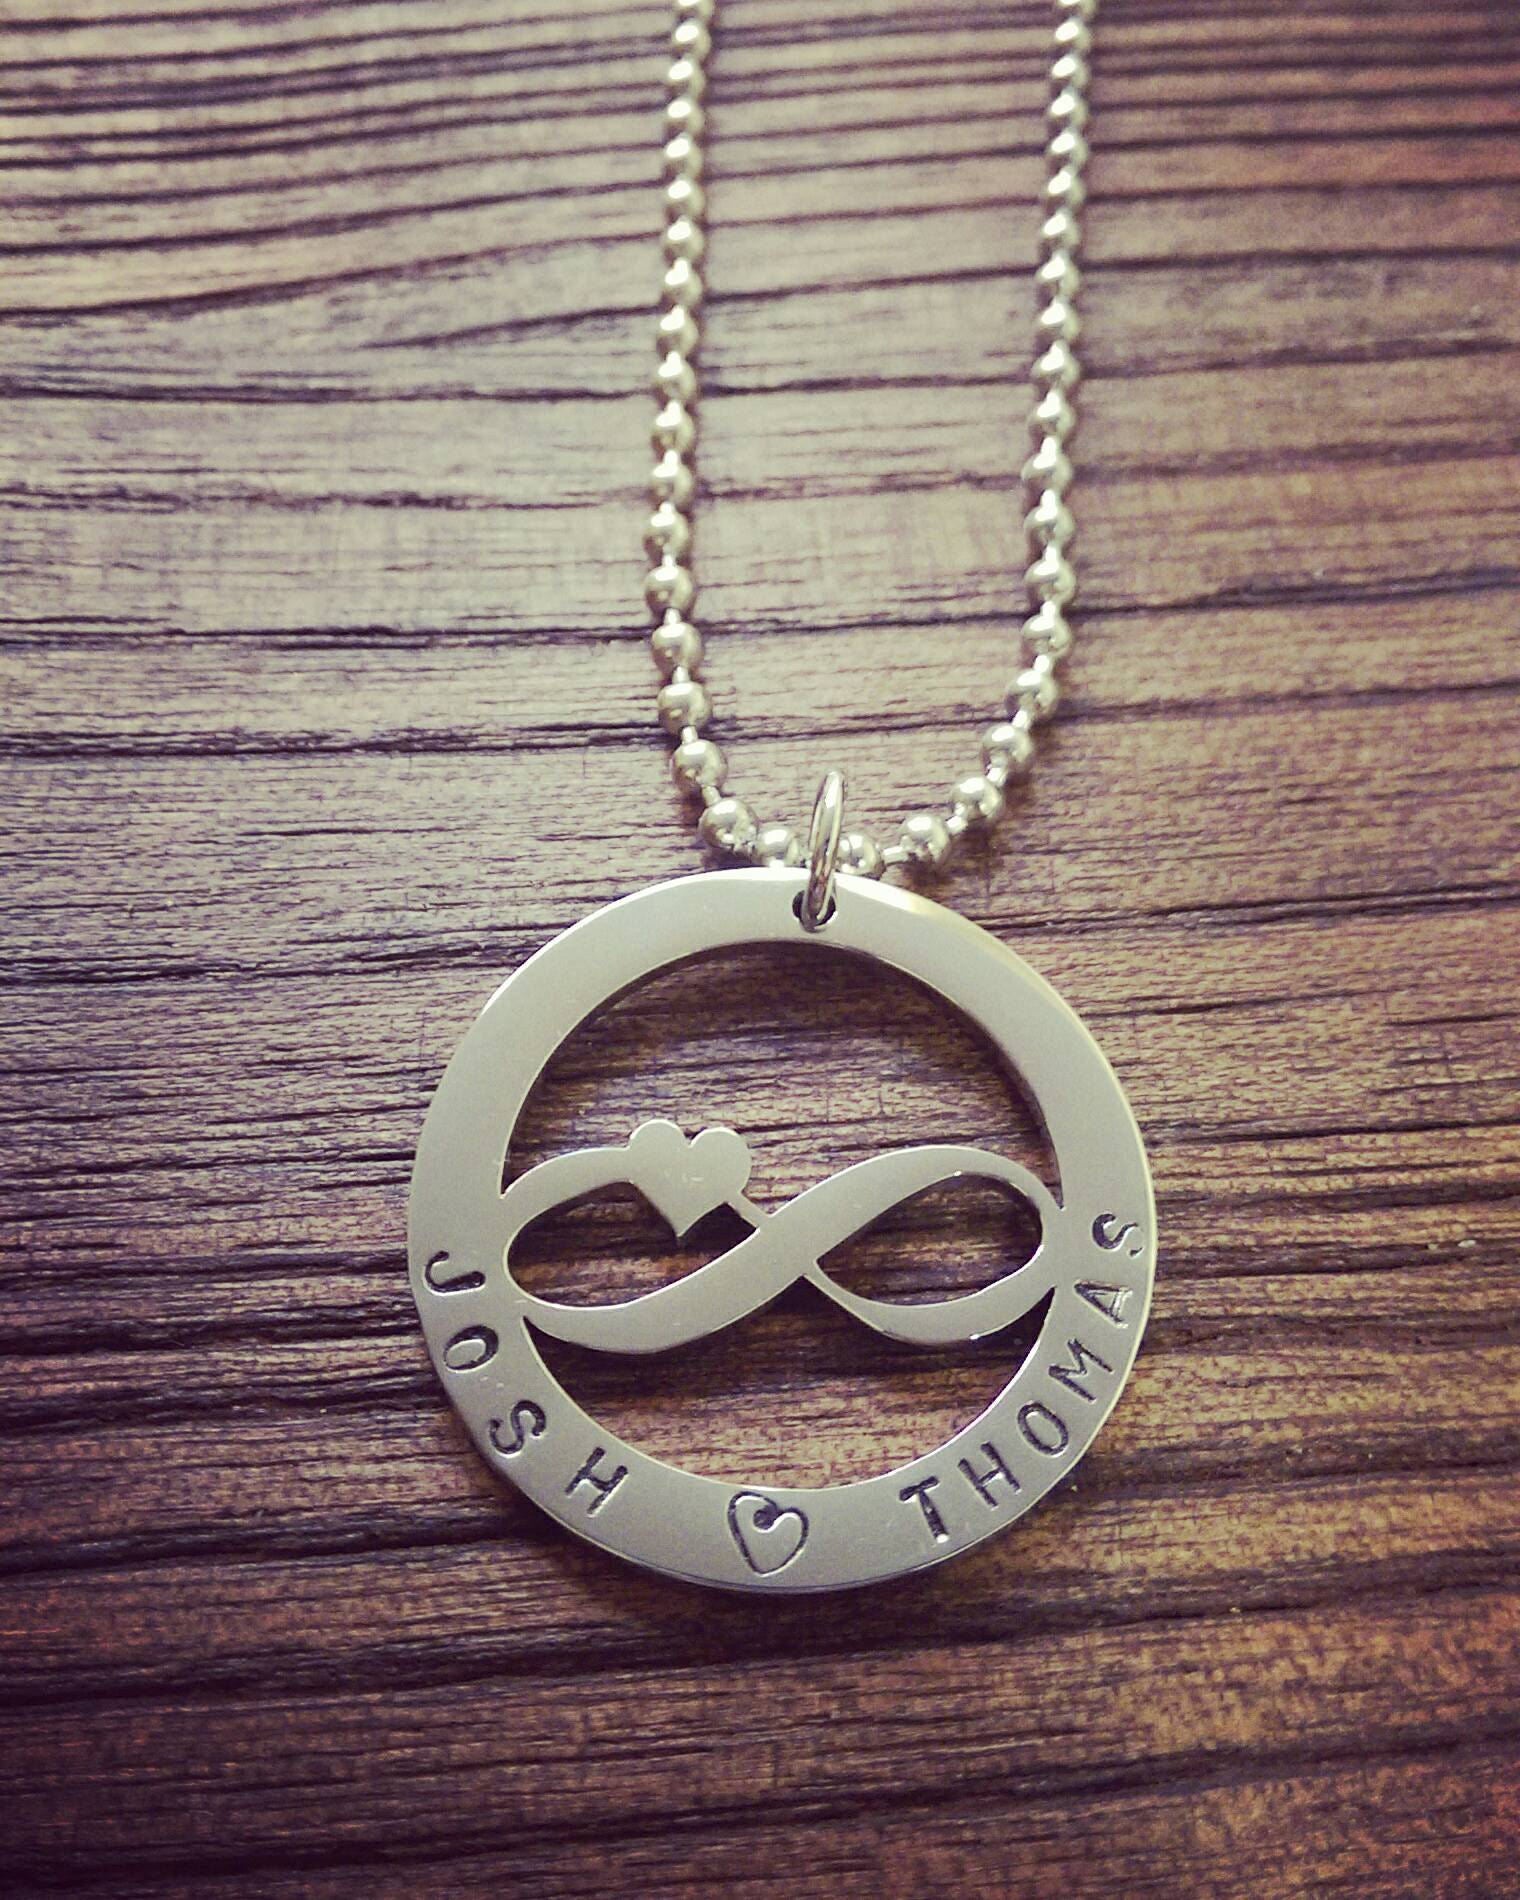 Personalised Hand Stamped Necklace Design Pendant Stainless Steel. Choose design - Silver and Resin Designs